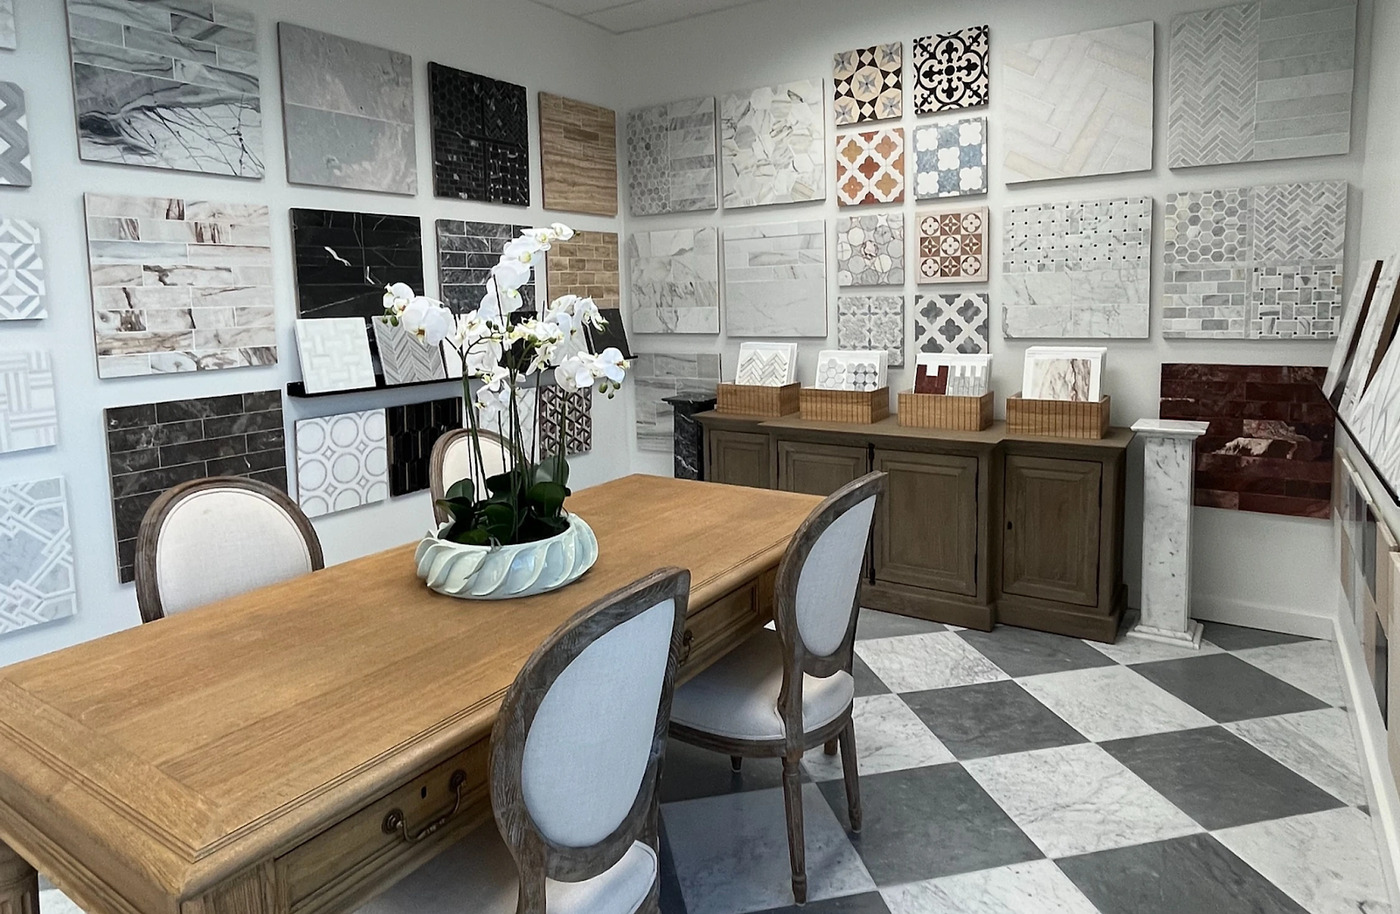 Founded by the powerhouse husband and wife team of Lyndsey and Jeff Glasener, who have 50 years of experience in the tile and stone industry, Sabine Hill has become a leading name in the field.